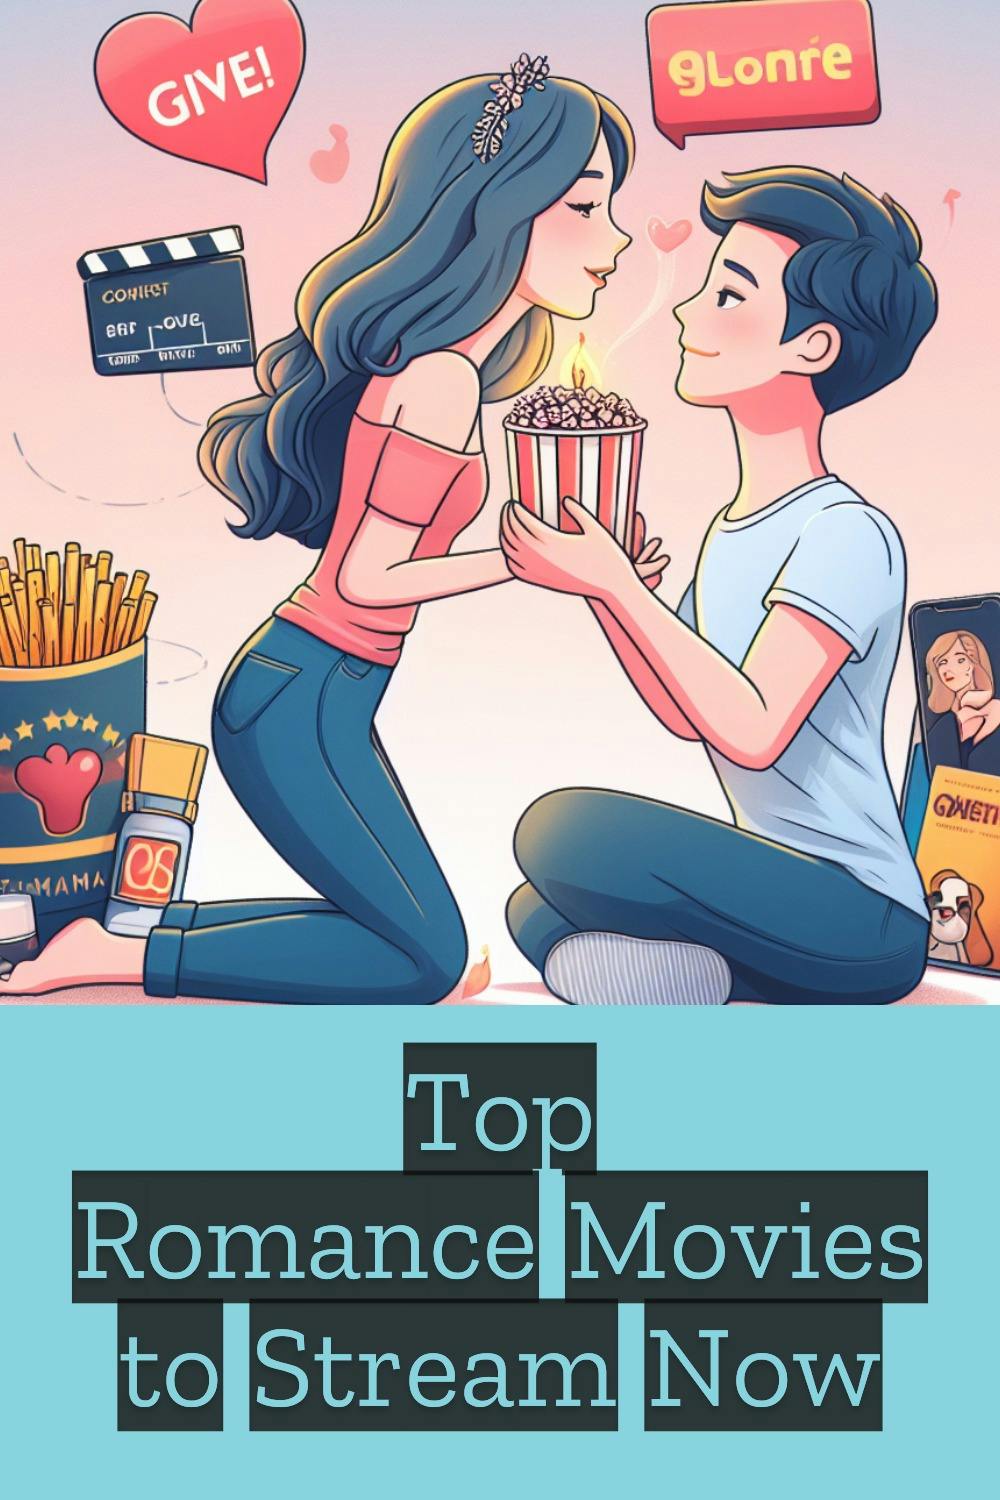 Top romance movies to watch on Amazon or iTunes